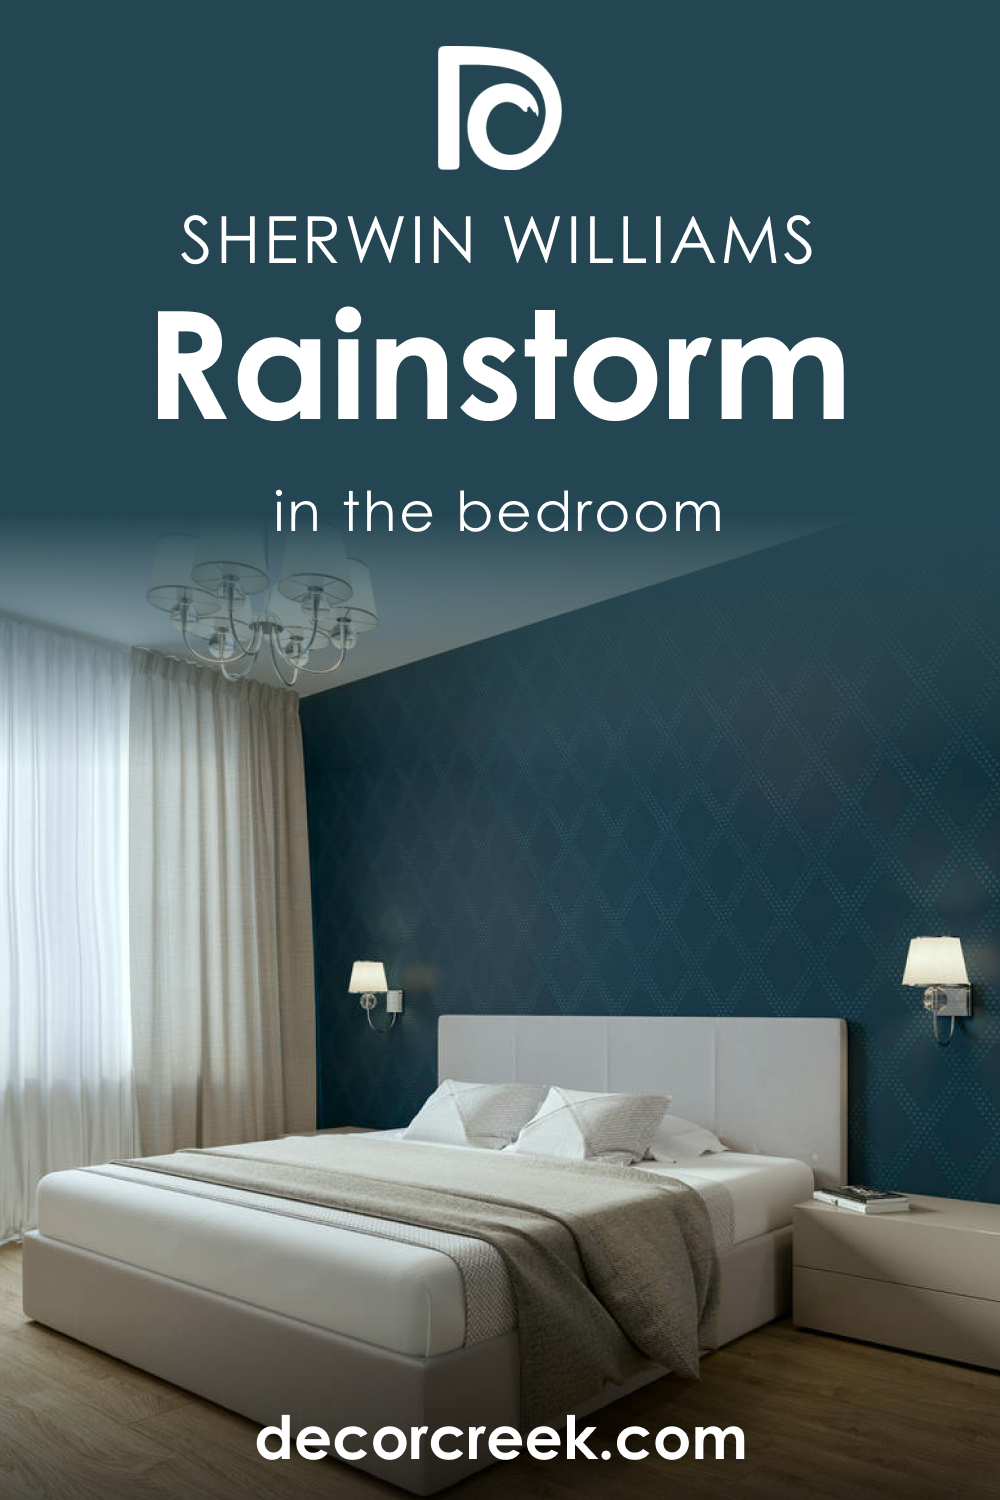 How to Use SW 6230 Rainstorm in the Bedroom?